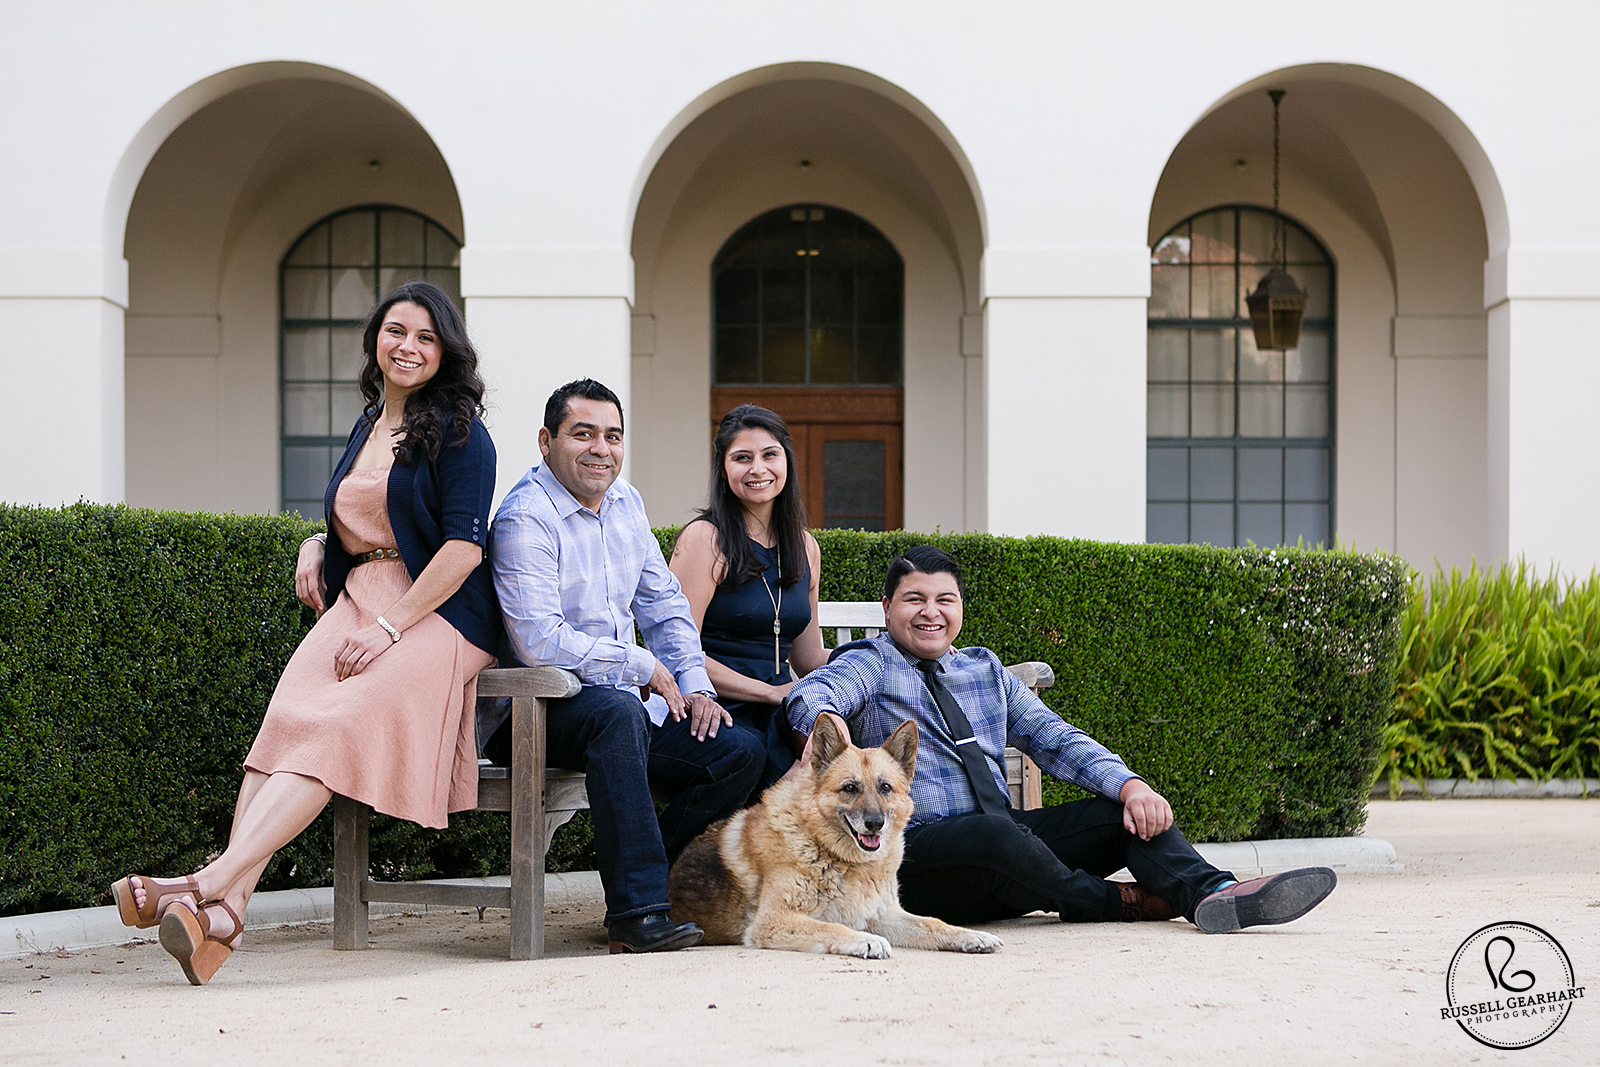 Pasadena City Hall Family Portrait - Russell Gearhart Photography - www.gearhartphoto.com